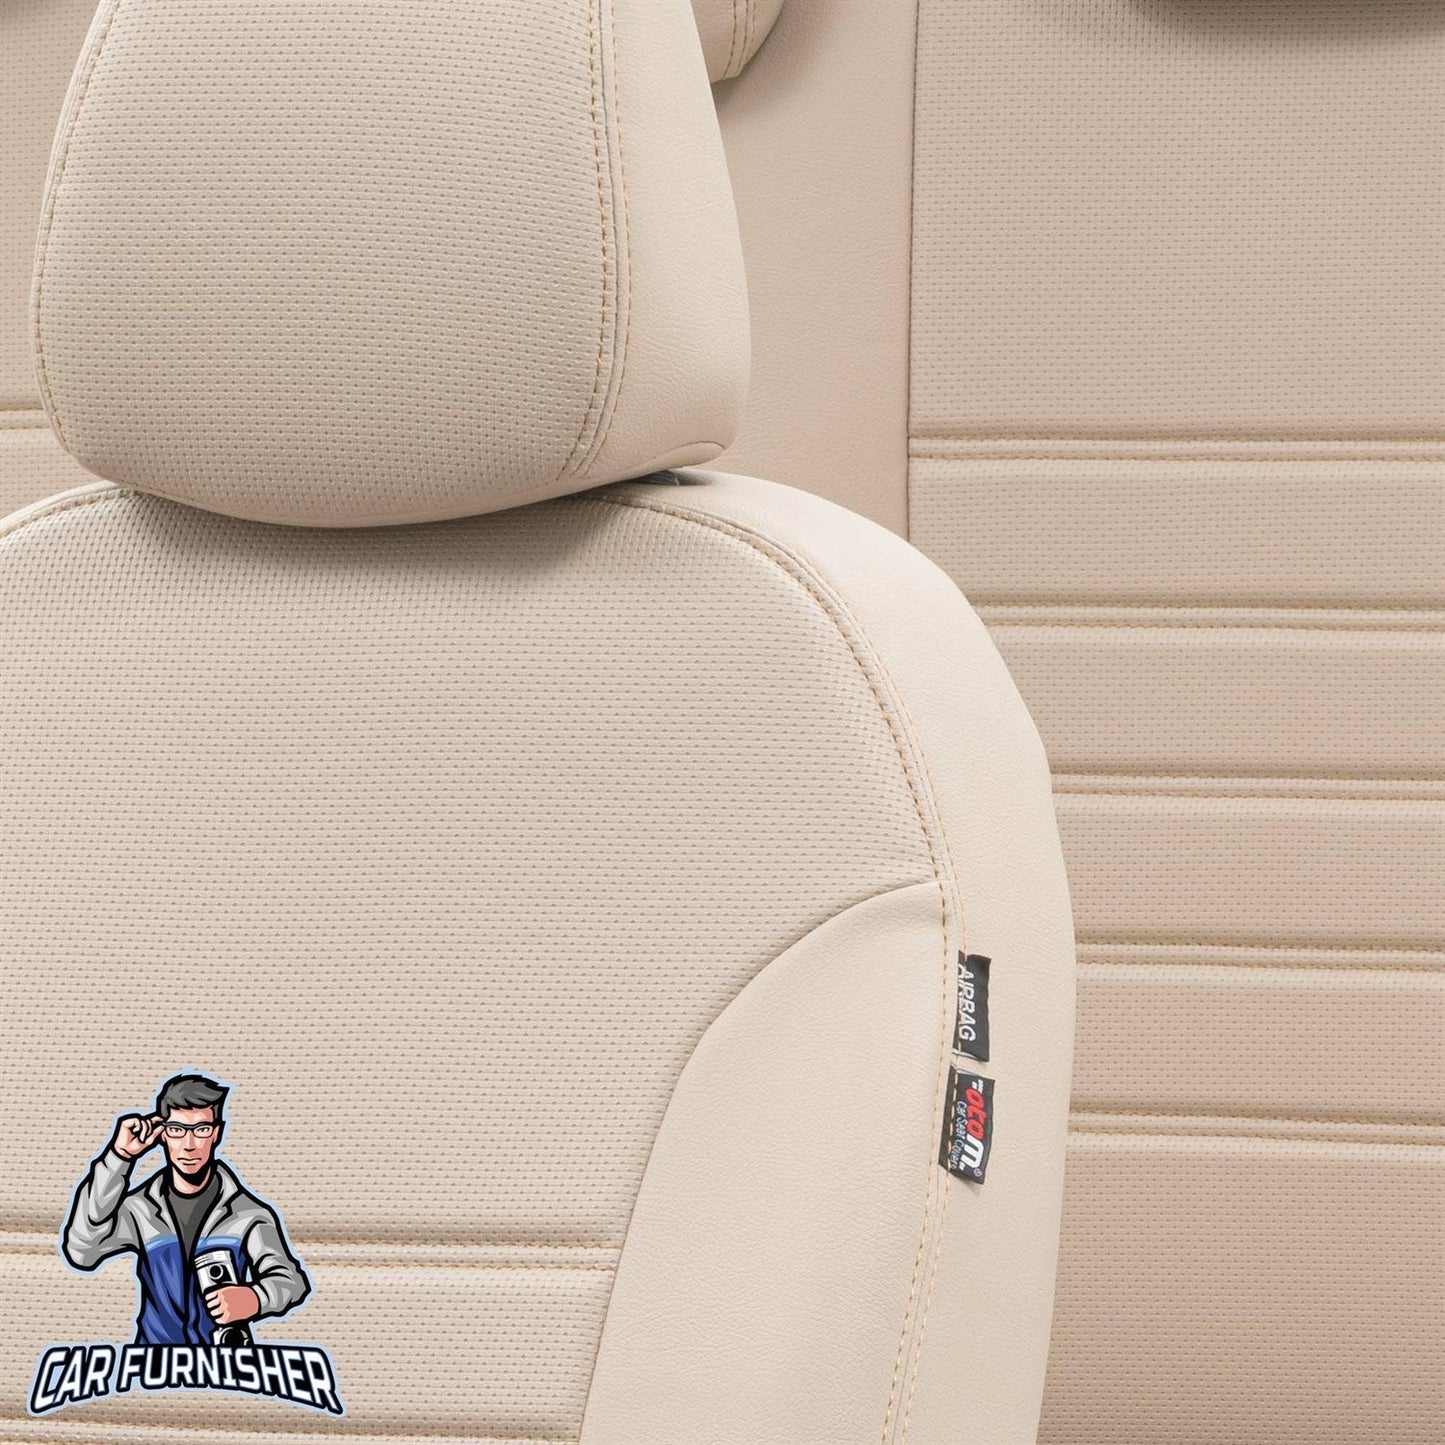 Peugeot 307 Seat Covers New York Leather Design Beige Leather